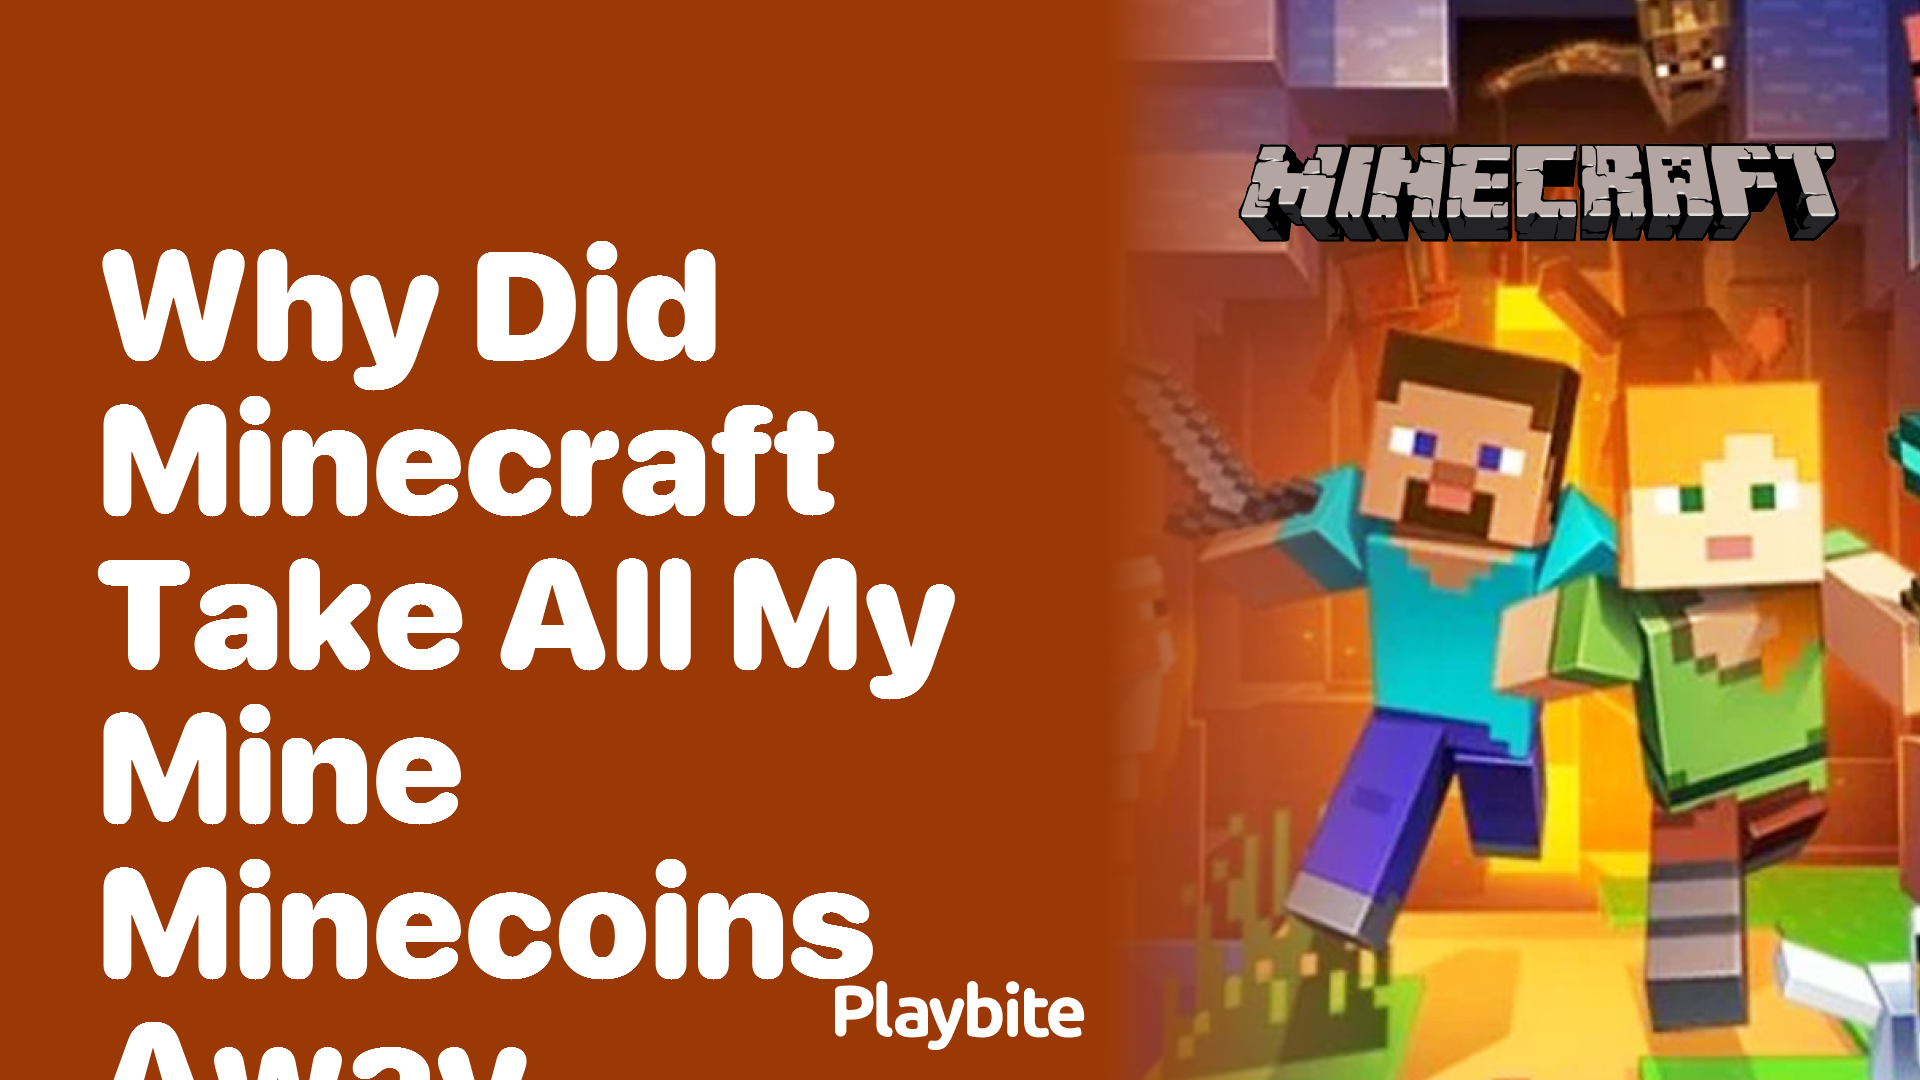 Why Did Minecraft Take Away All My Minecoins?